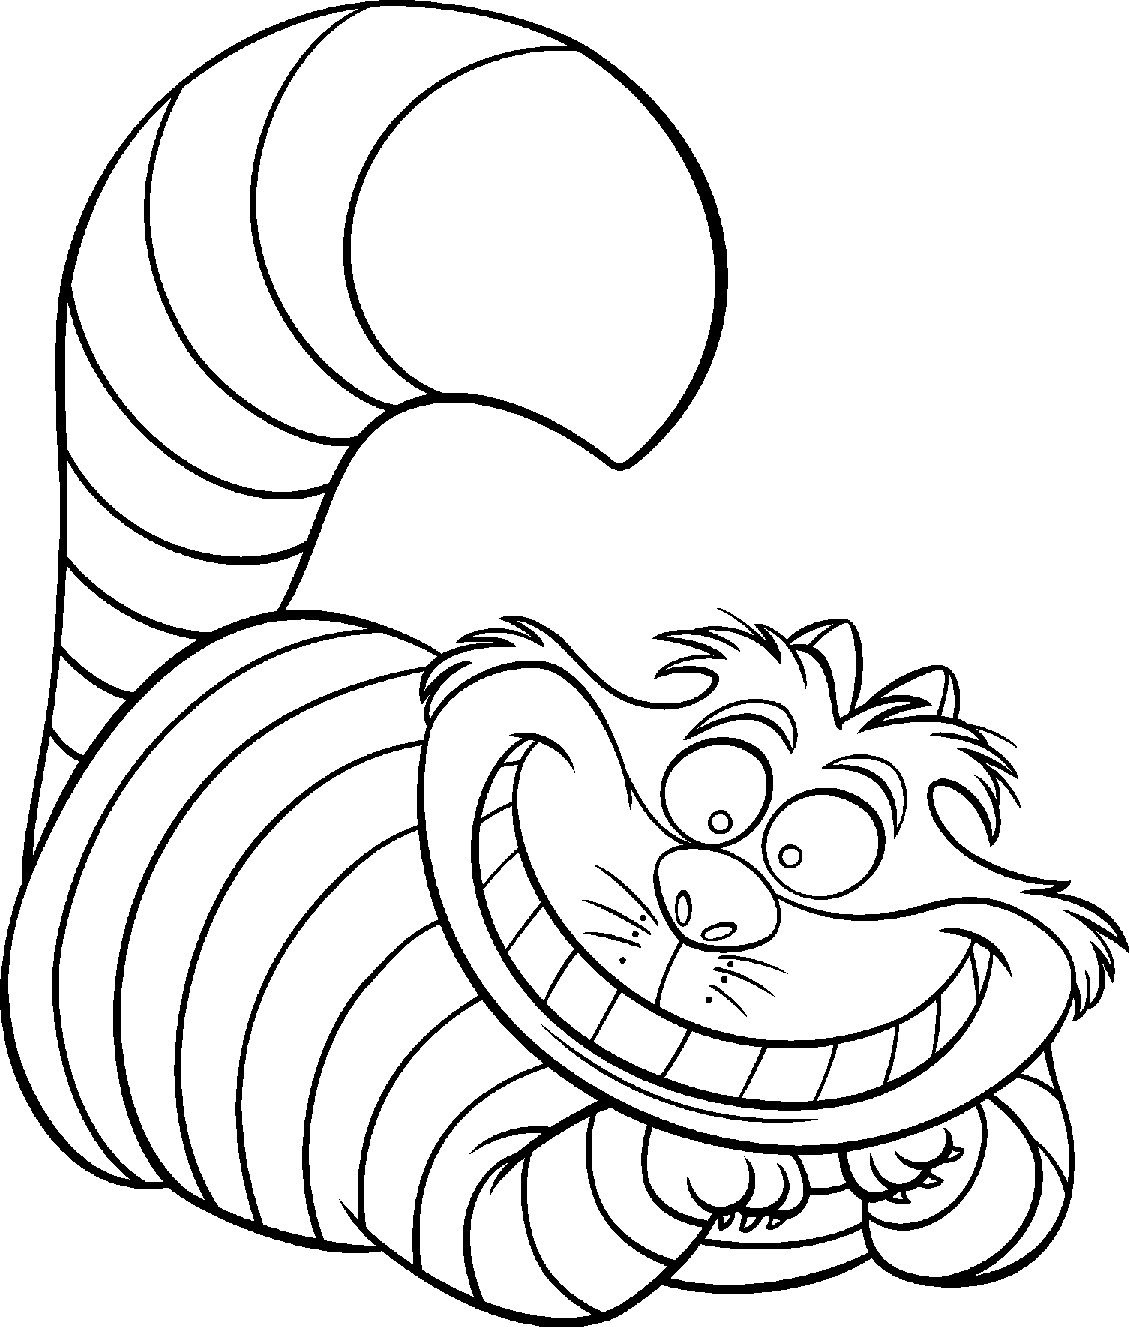 Coloring Pages : Free Printable Disneyring Pages Alice In Wonderland - Free Printable Disney Coloring Pages